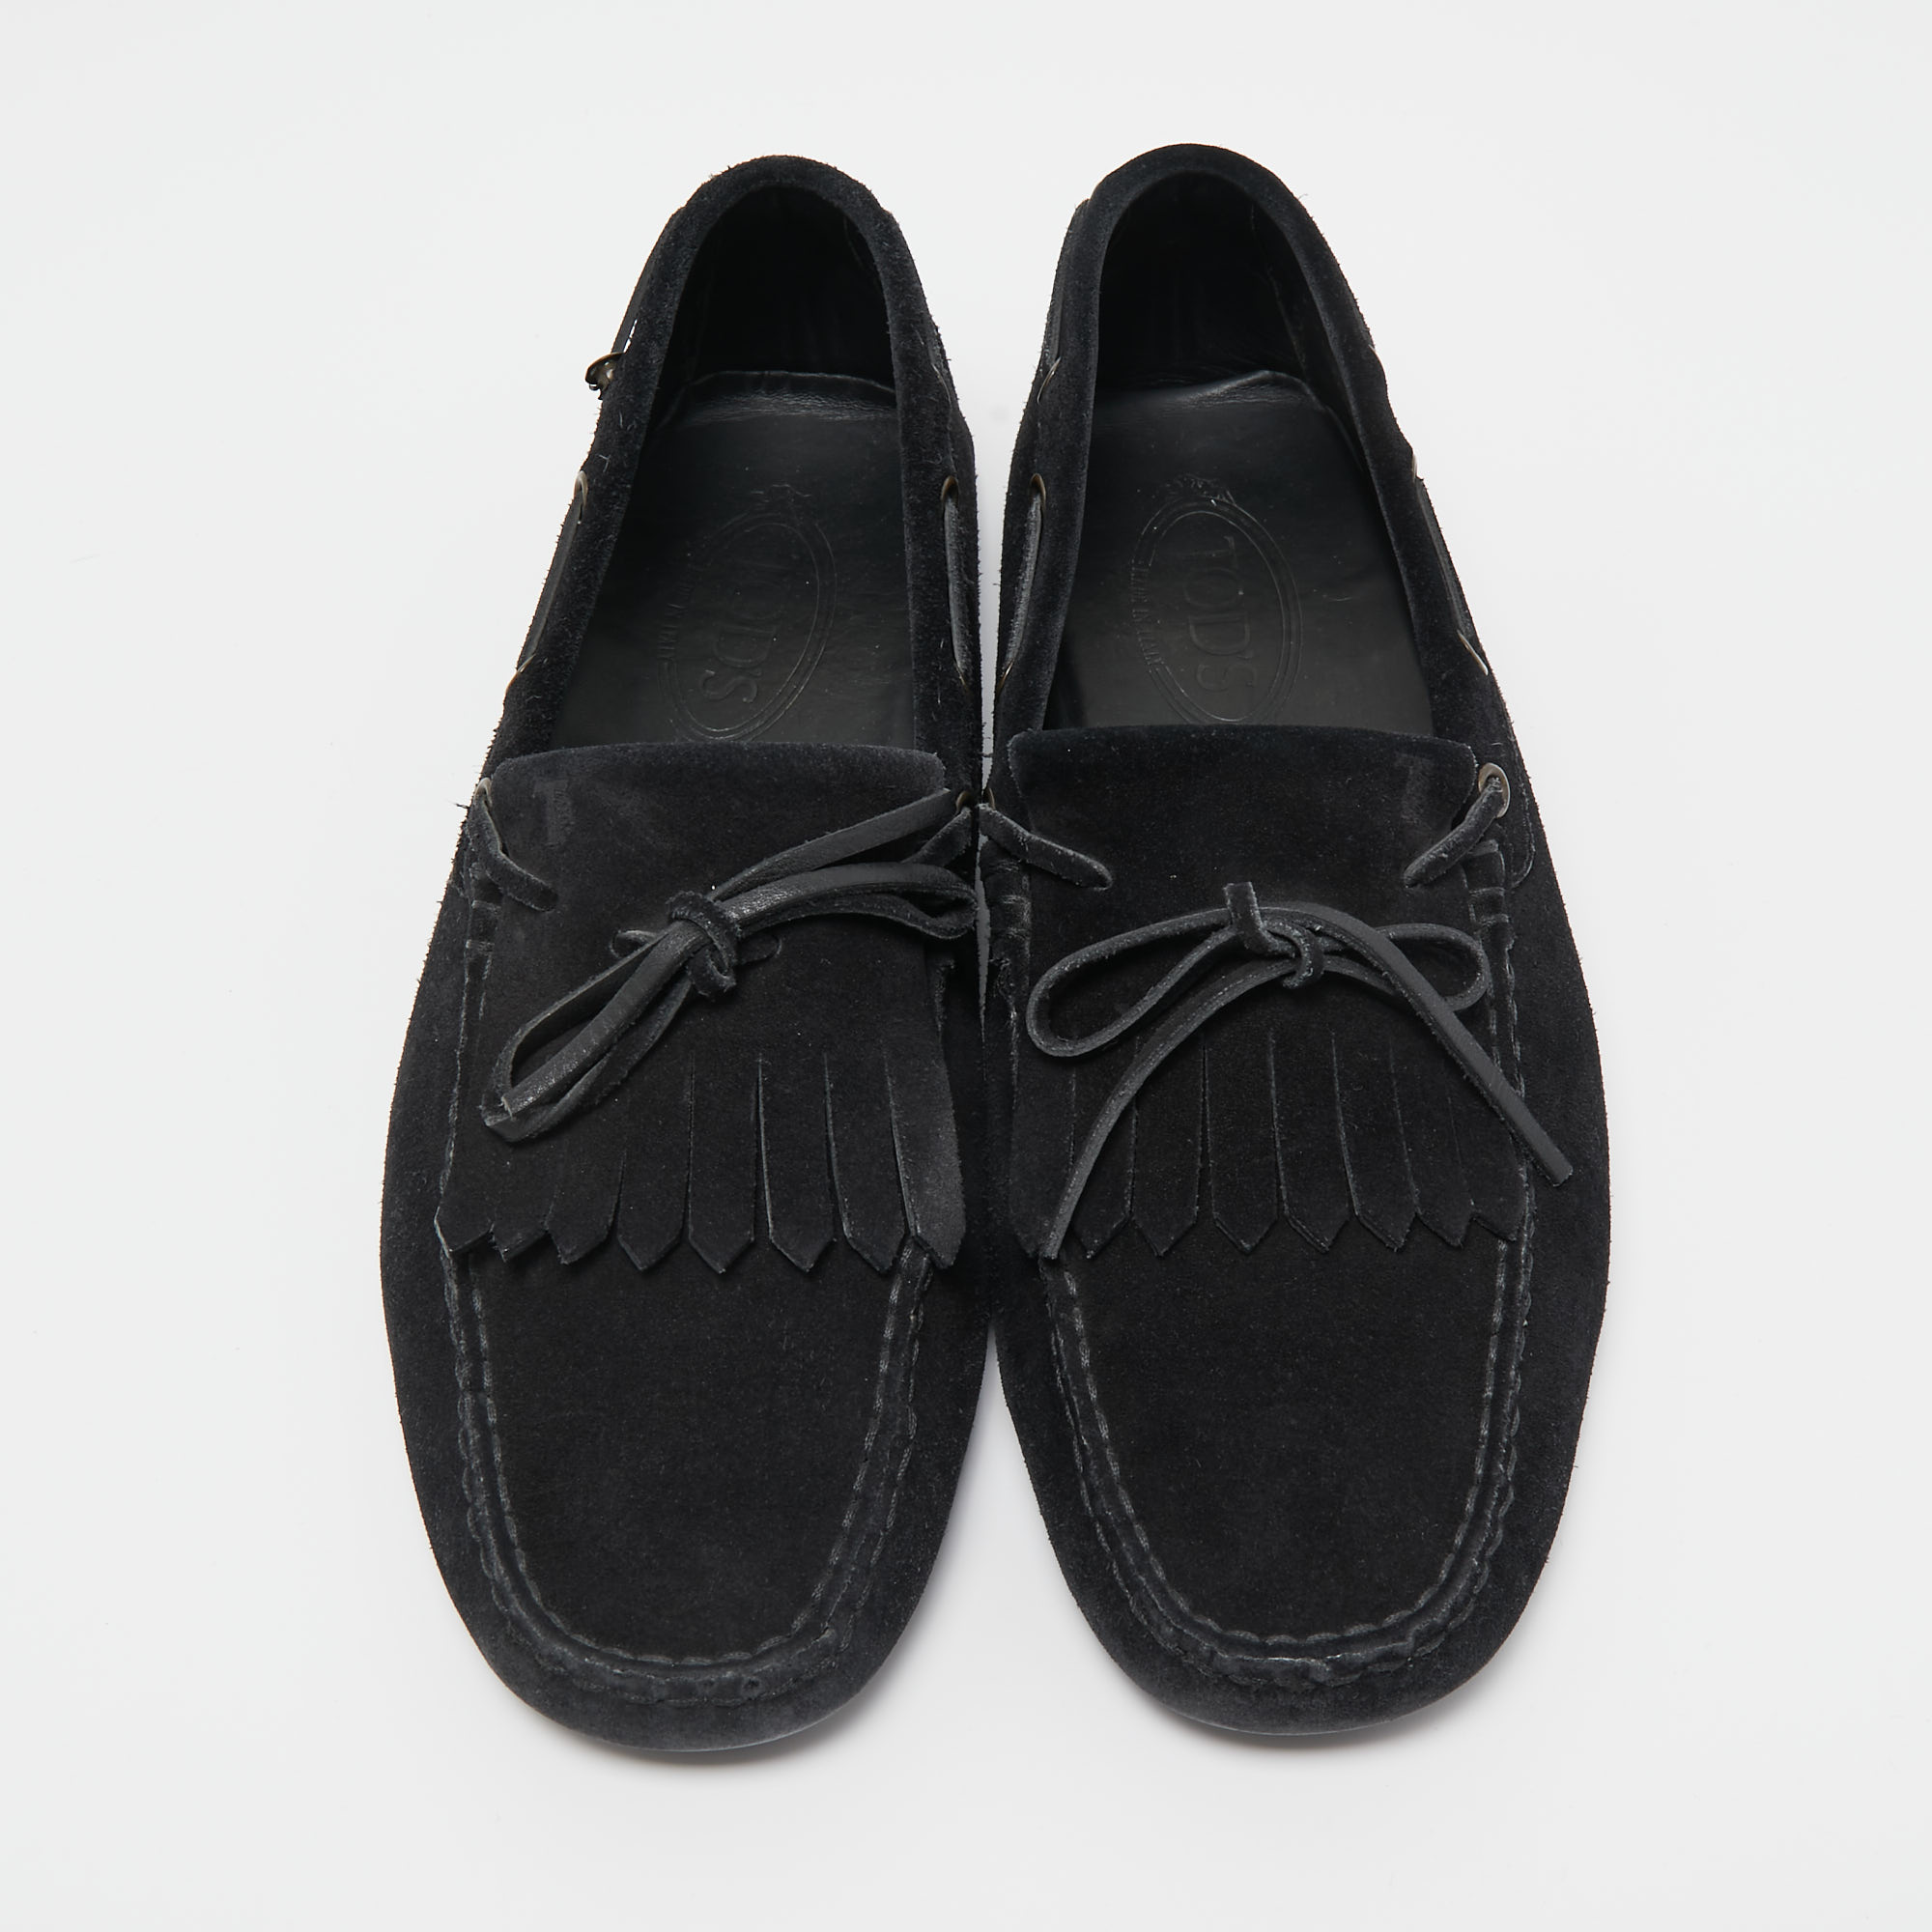 Tod's Black Suede Bow Fringe Loafers Size 43